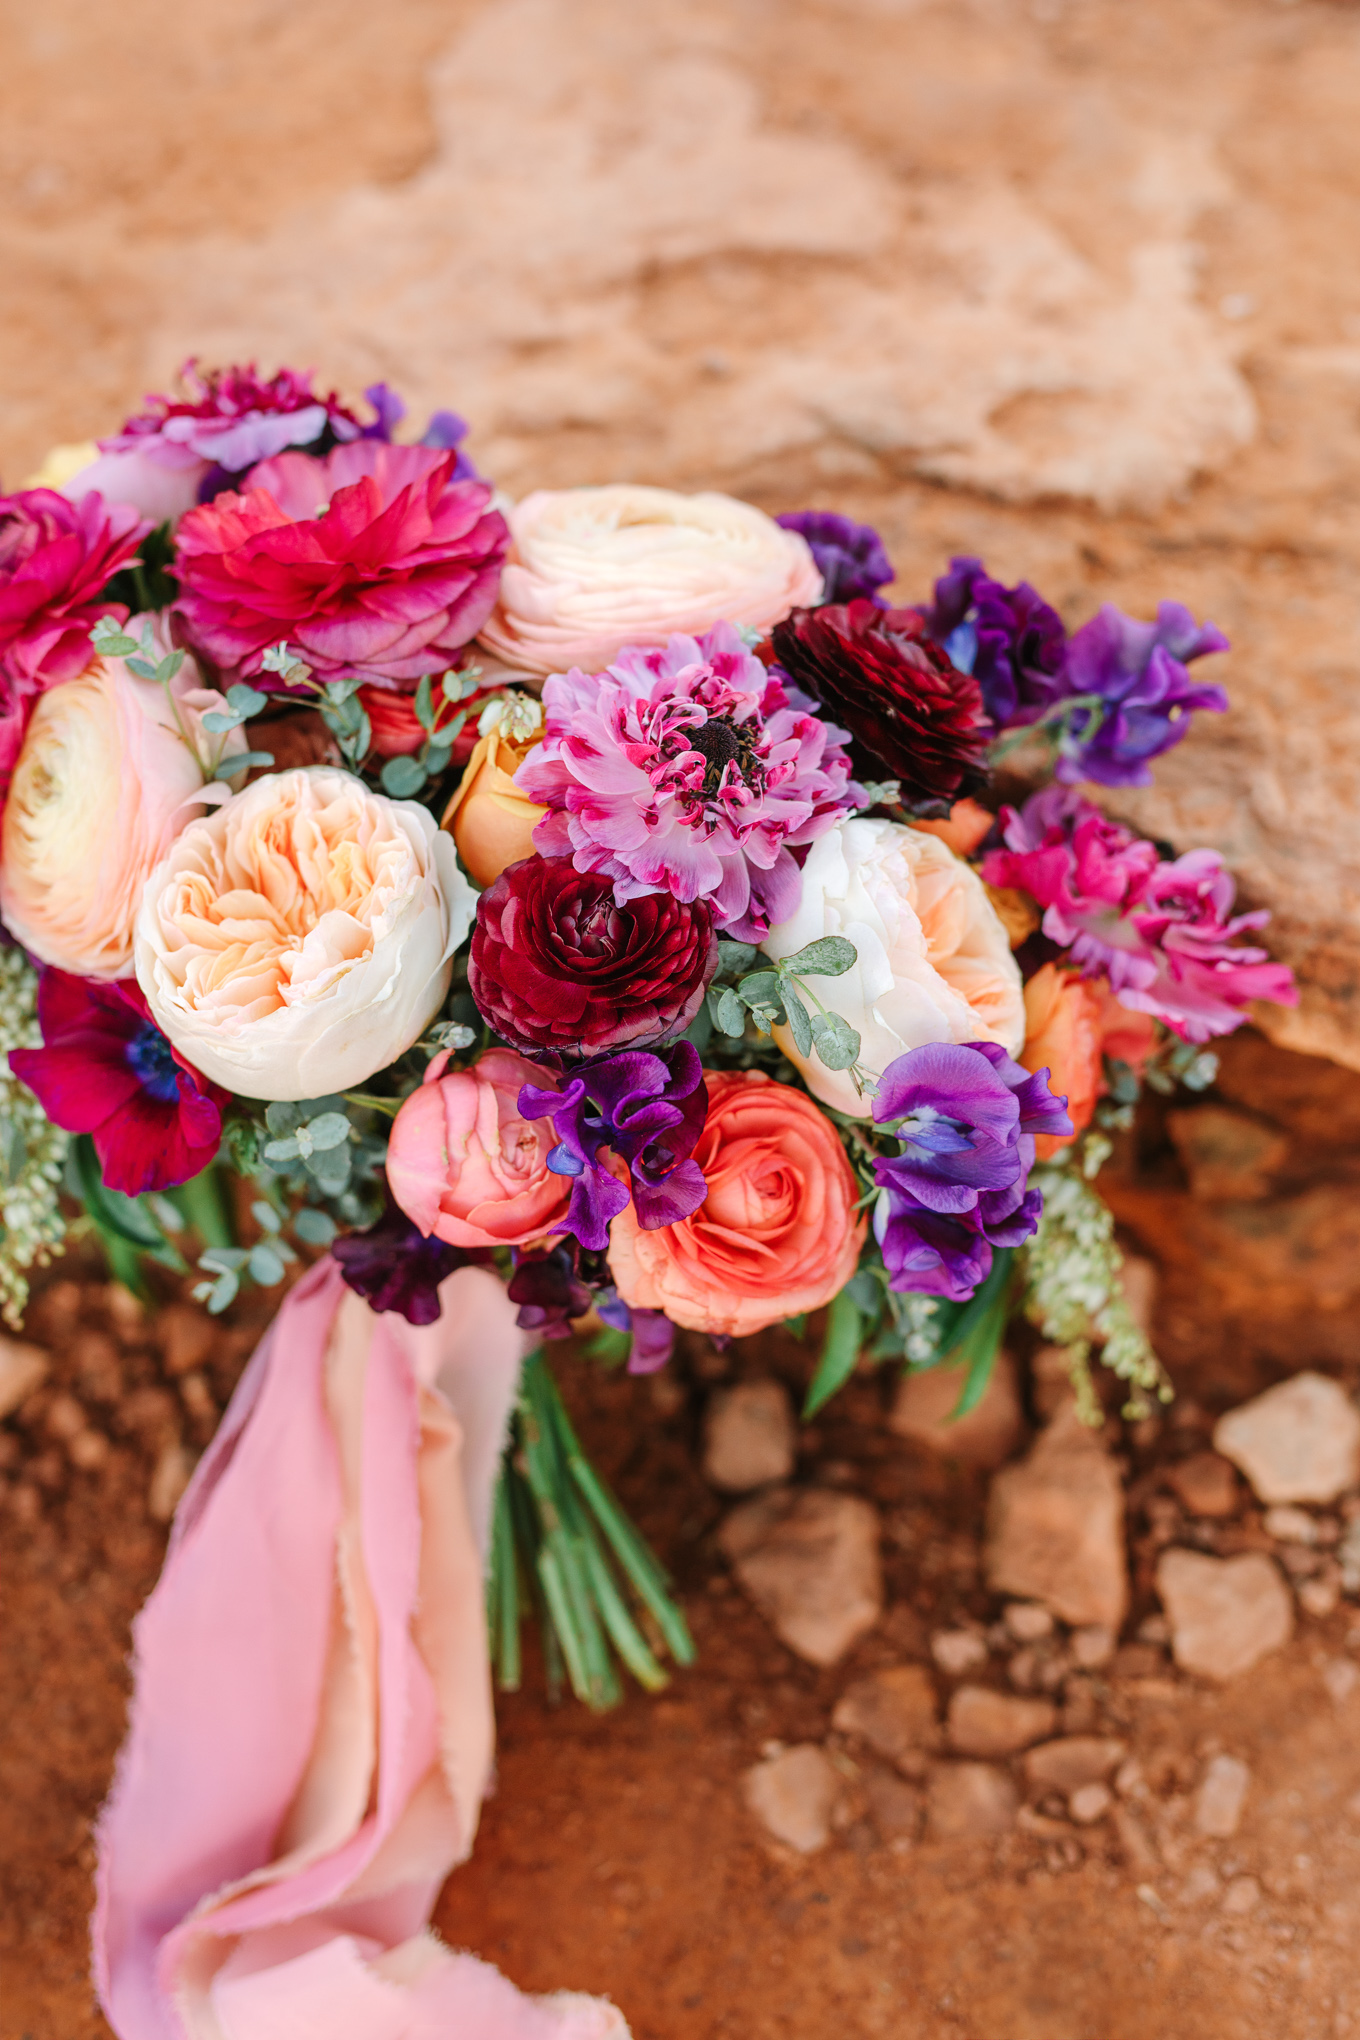 Vibrant sunset-inspired wedding bouquet in Sedona Arizona | Beautiful bridal bouquet inspiration and advice | Colorful and elevated wedding photography for fun-loving couples in Southern California | #weddingflowers #weddingbouquet #bridebouquet #bouquetideas #uniquebouquet   Source: Mary Costa Photography | Los Angeles